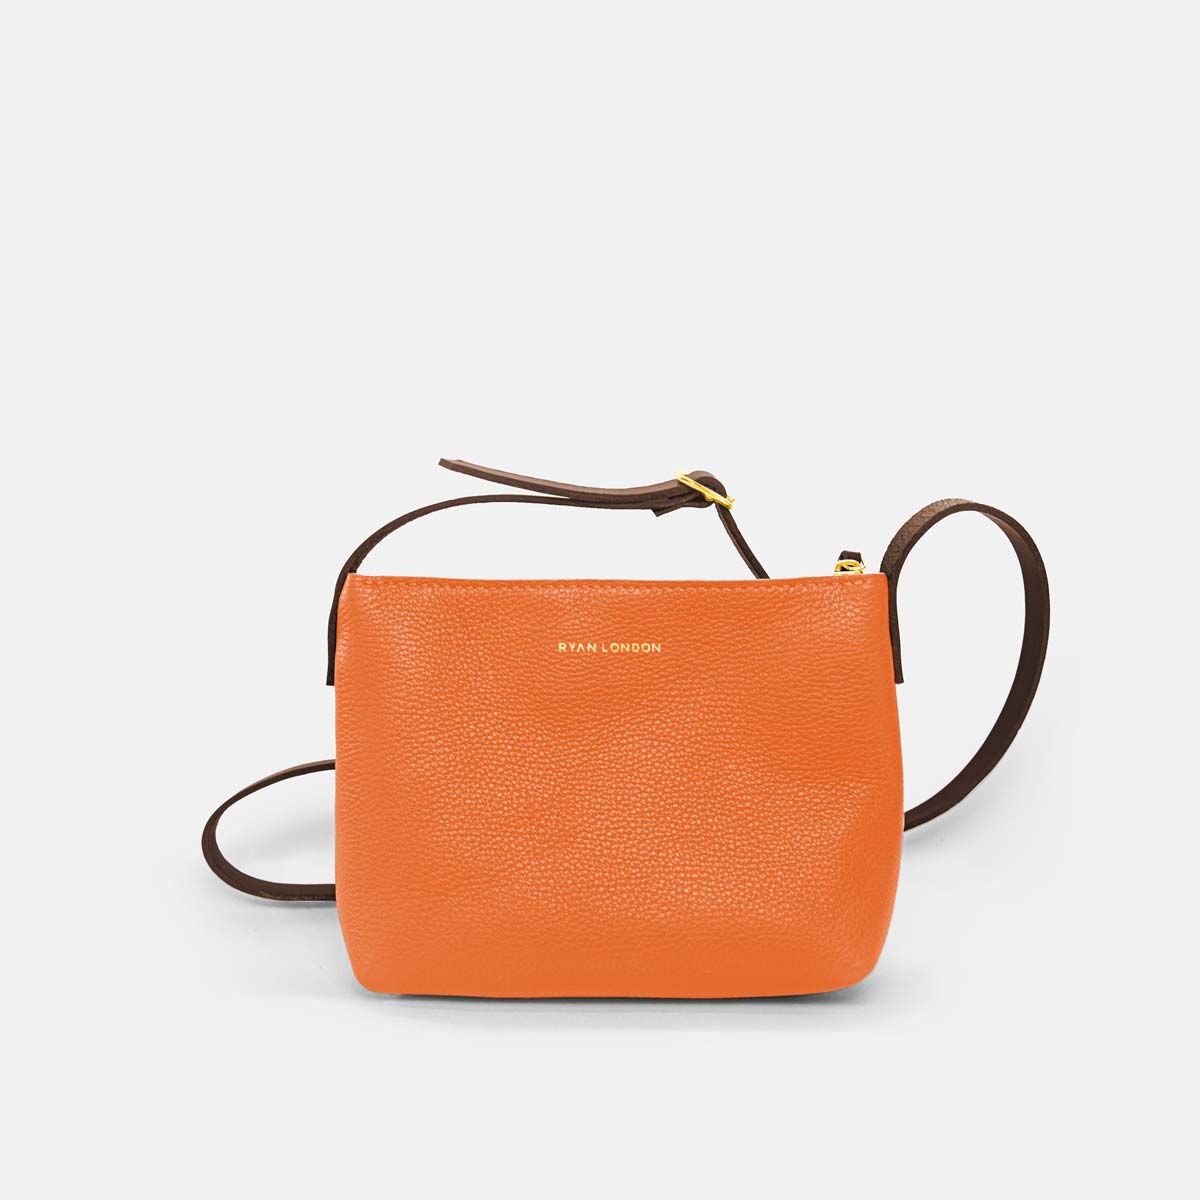 Italian Leather Crossbody Tote with Wool Felt and Zip - Orange and Beige